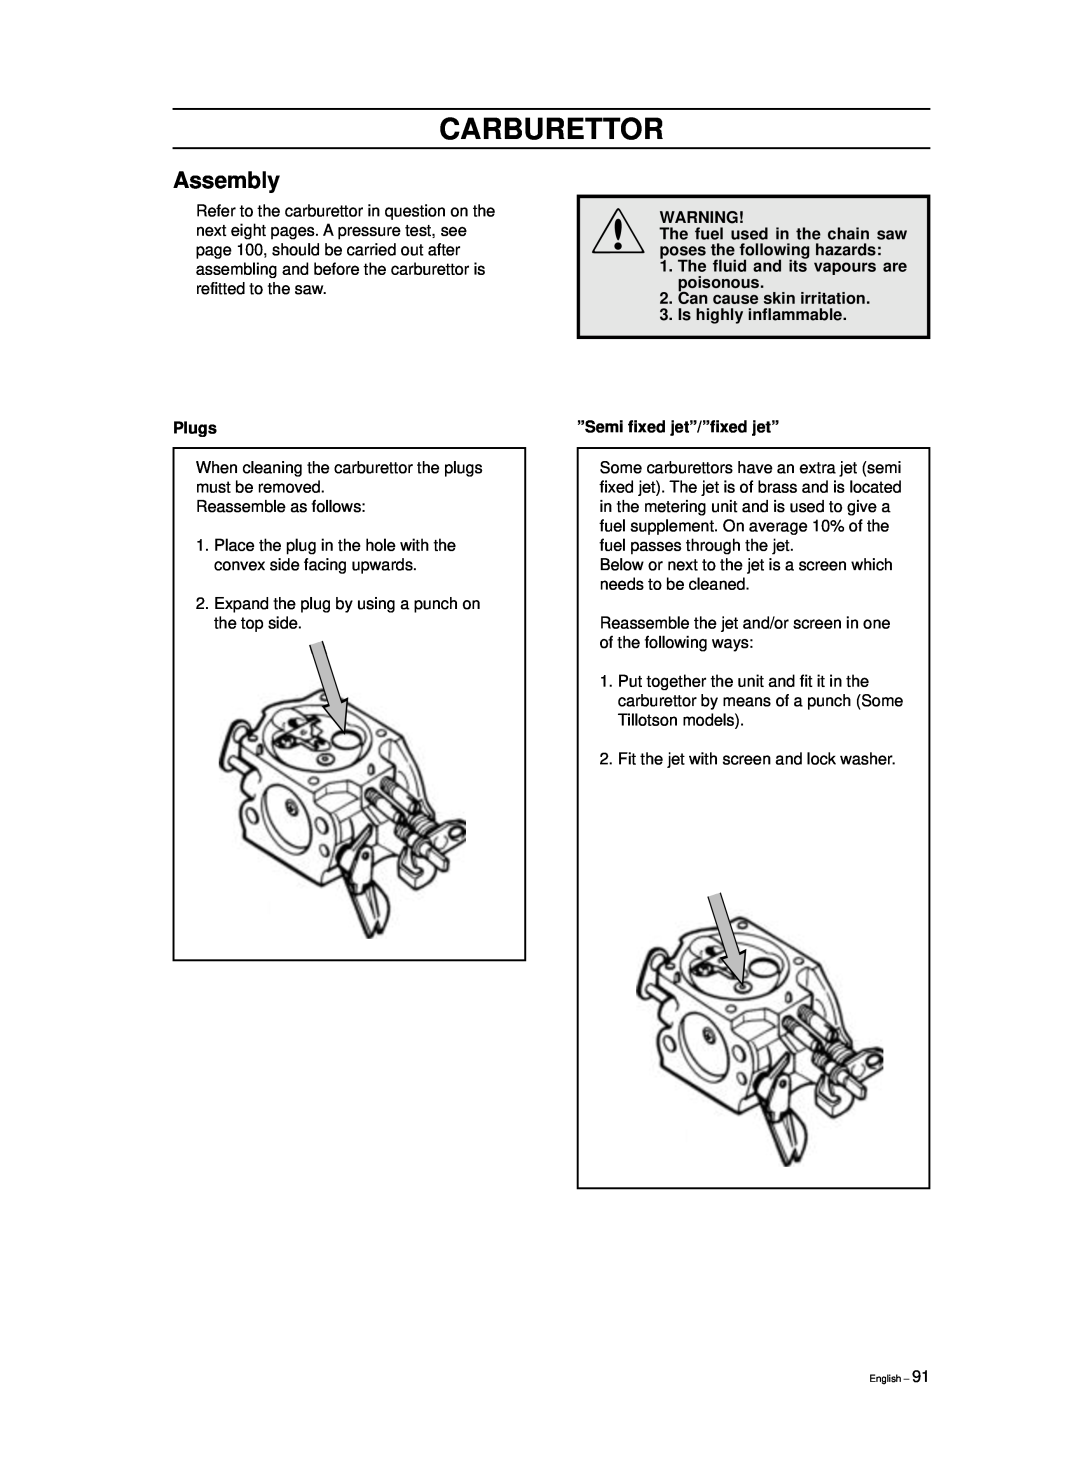 Husqvarna 965030296, 965030298 Carburettor, Assembly, Plugs, The fuel used in the chain saw poses the following hazards 